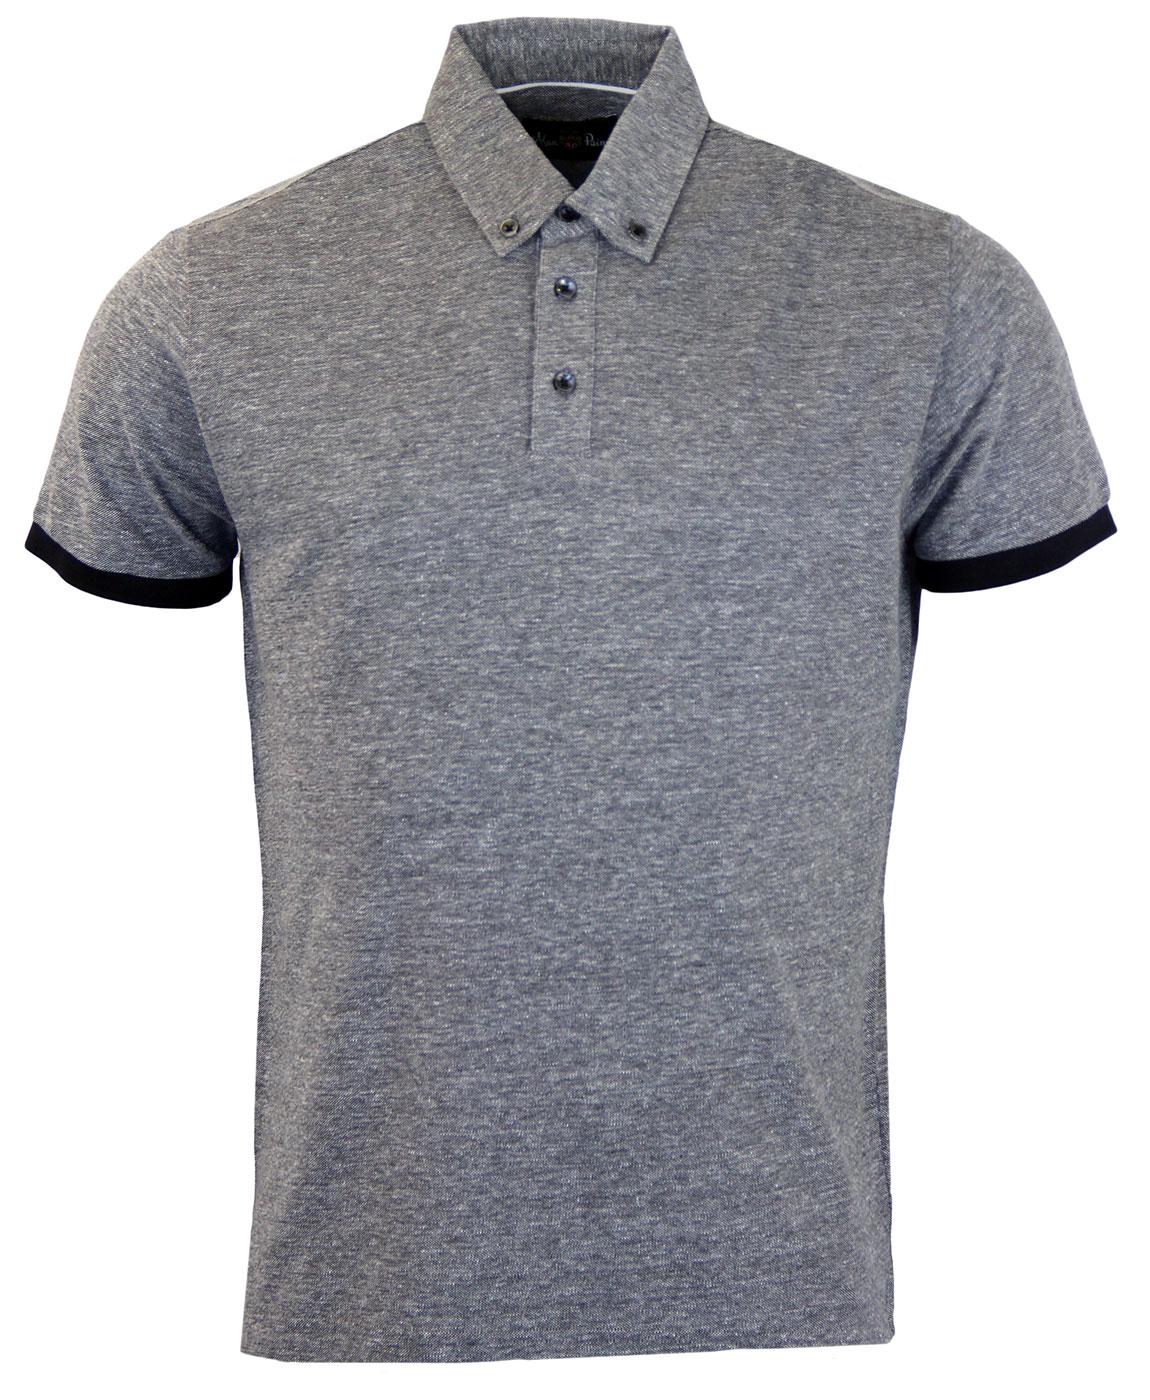 ALAN PAINE Conway Retro Mod Button Down Tailored Polo Top in Navy